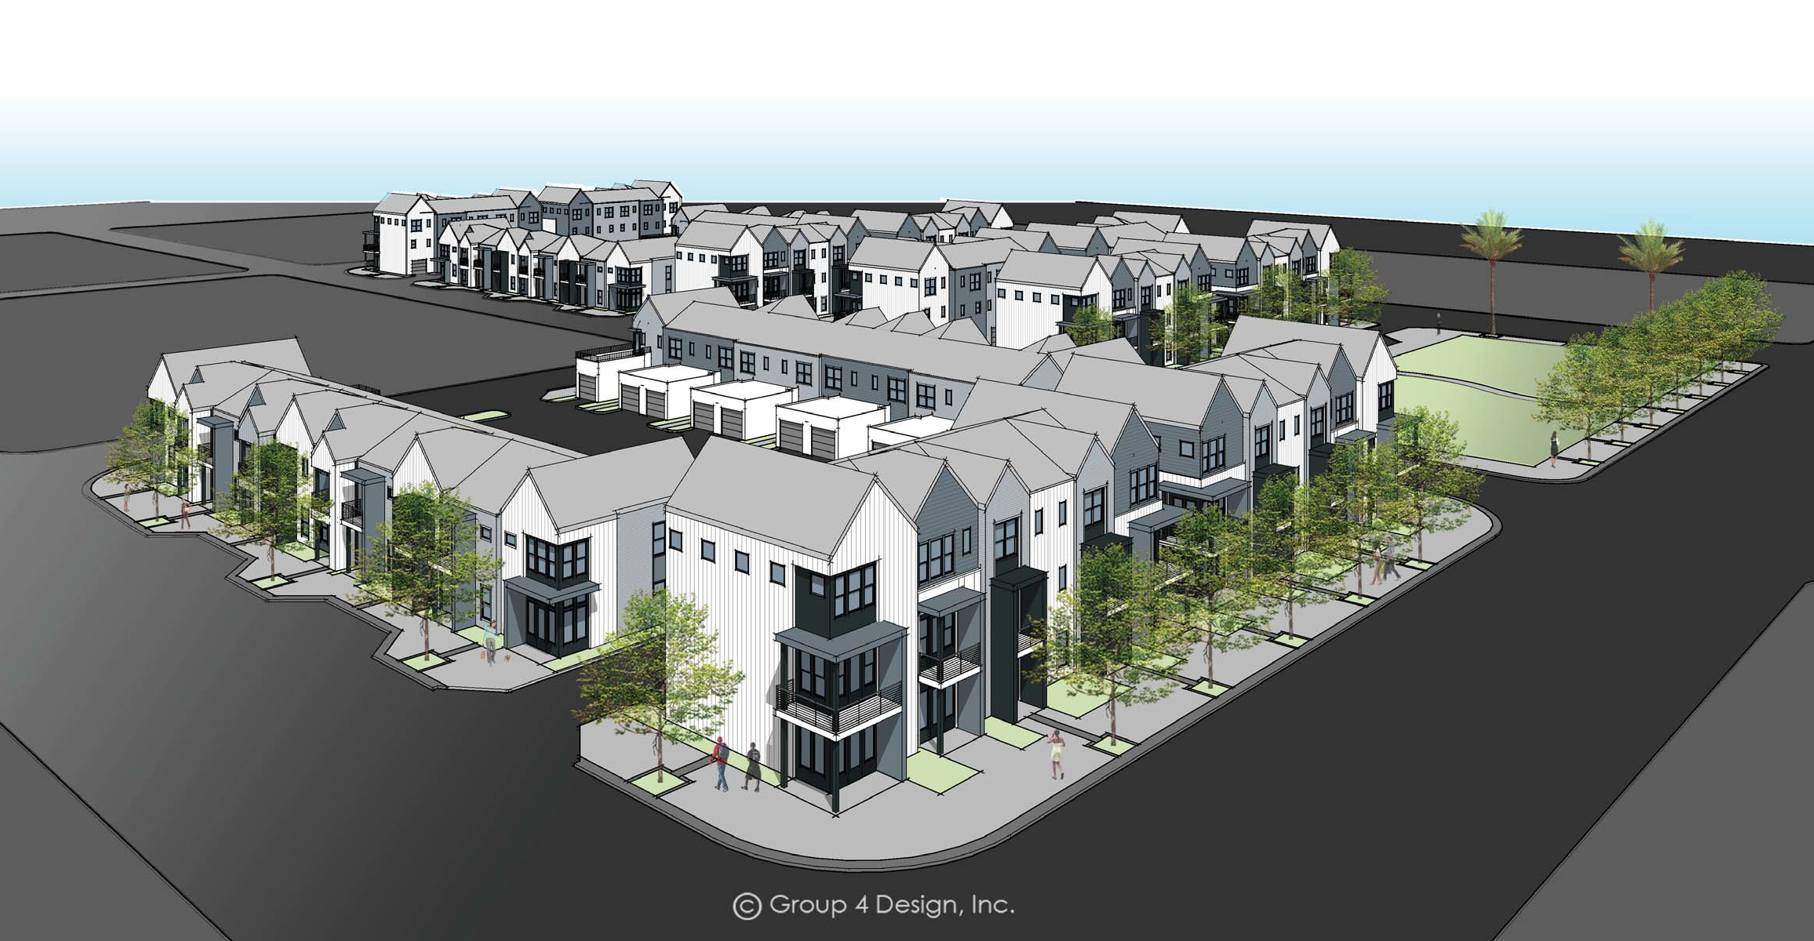 The townhomes are planned at Adams, Johnson, Lee and Forsyth streets.